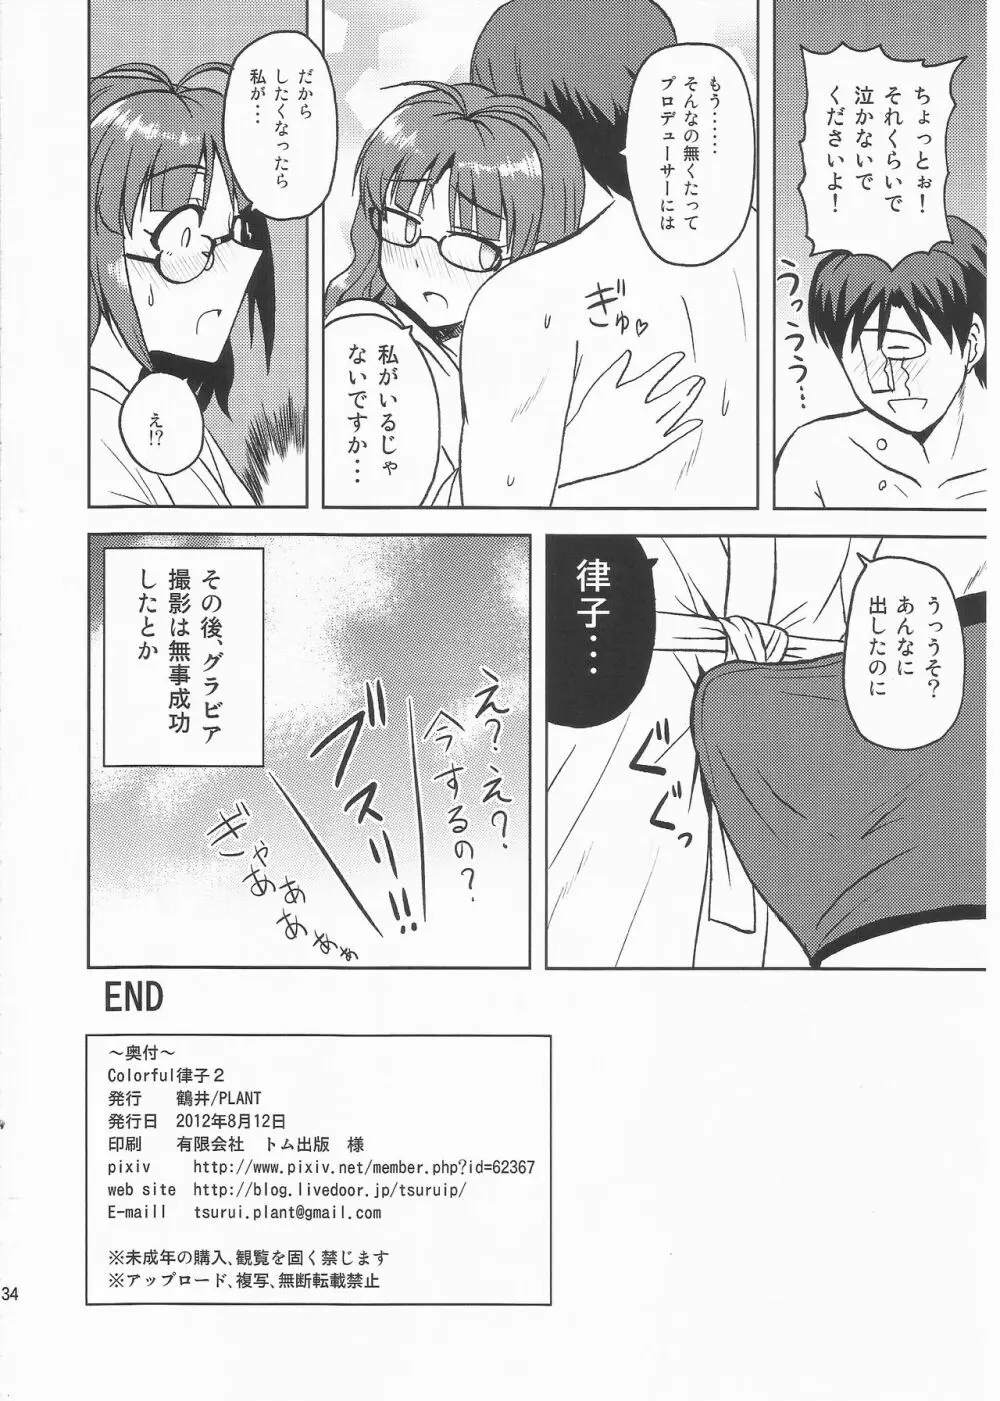 Colorful律子2 Page.33